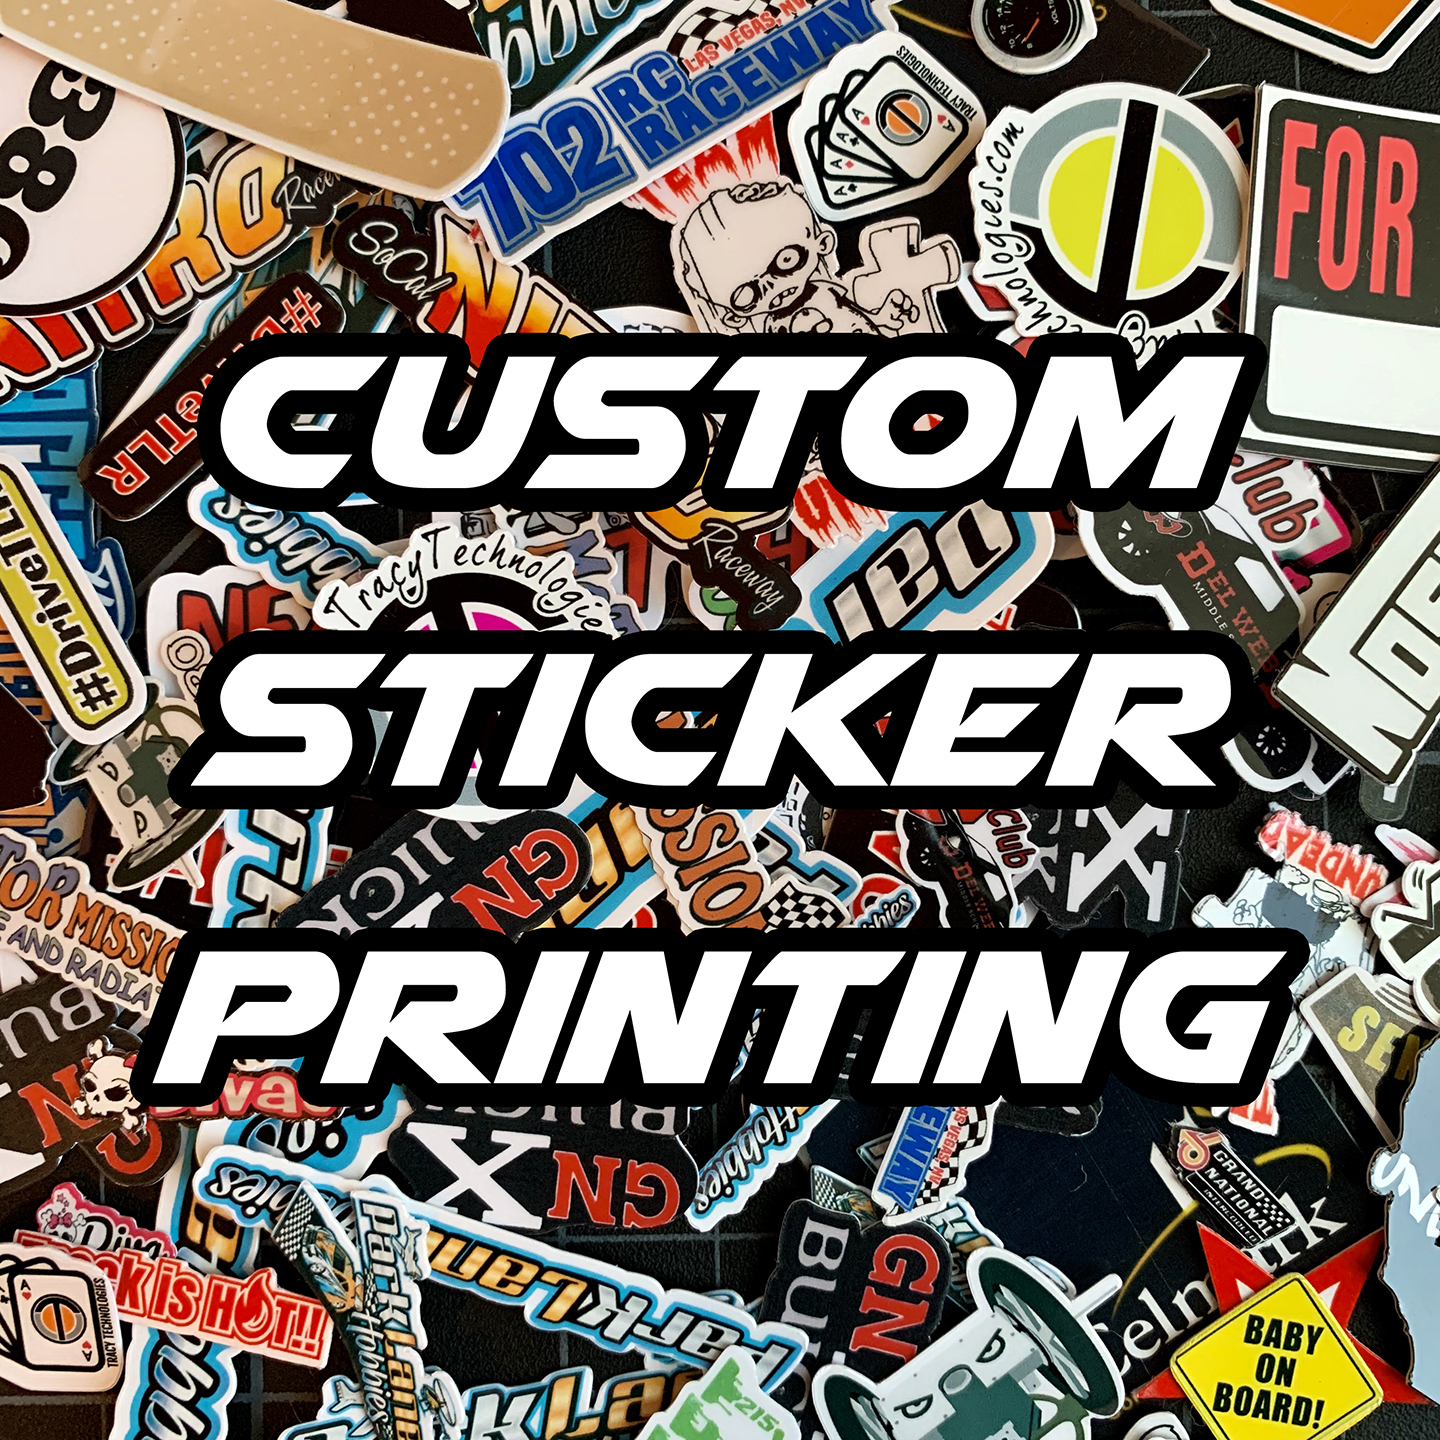  High quality custom stickers & decals